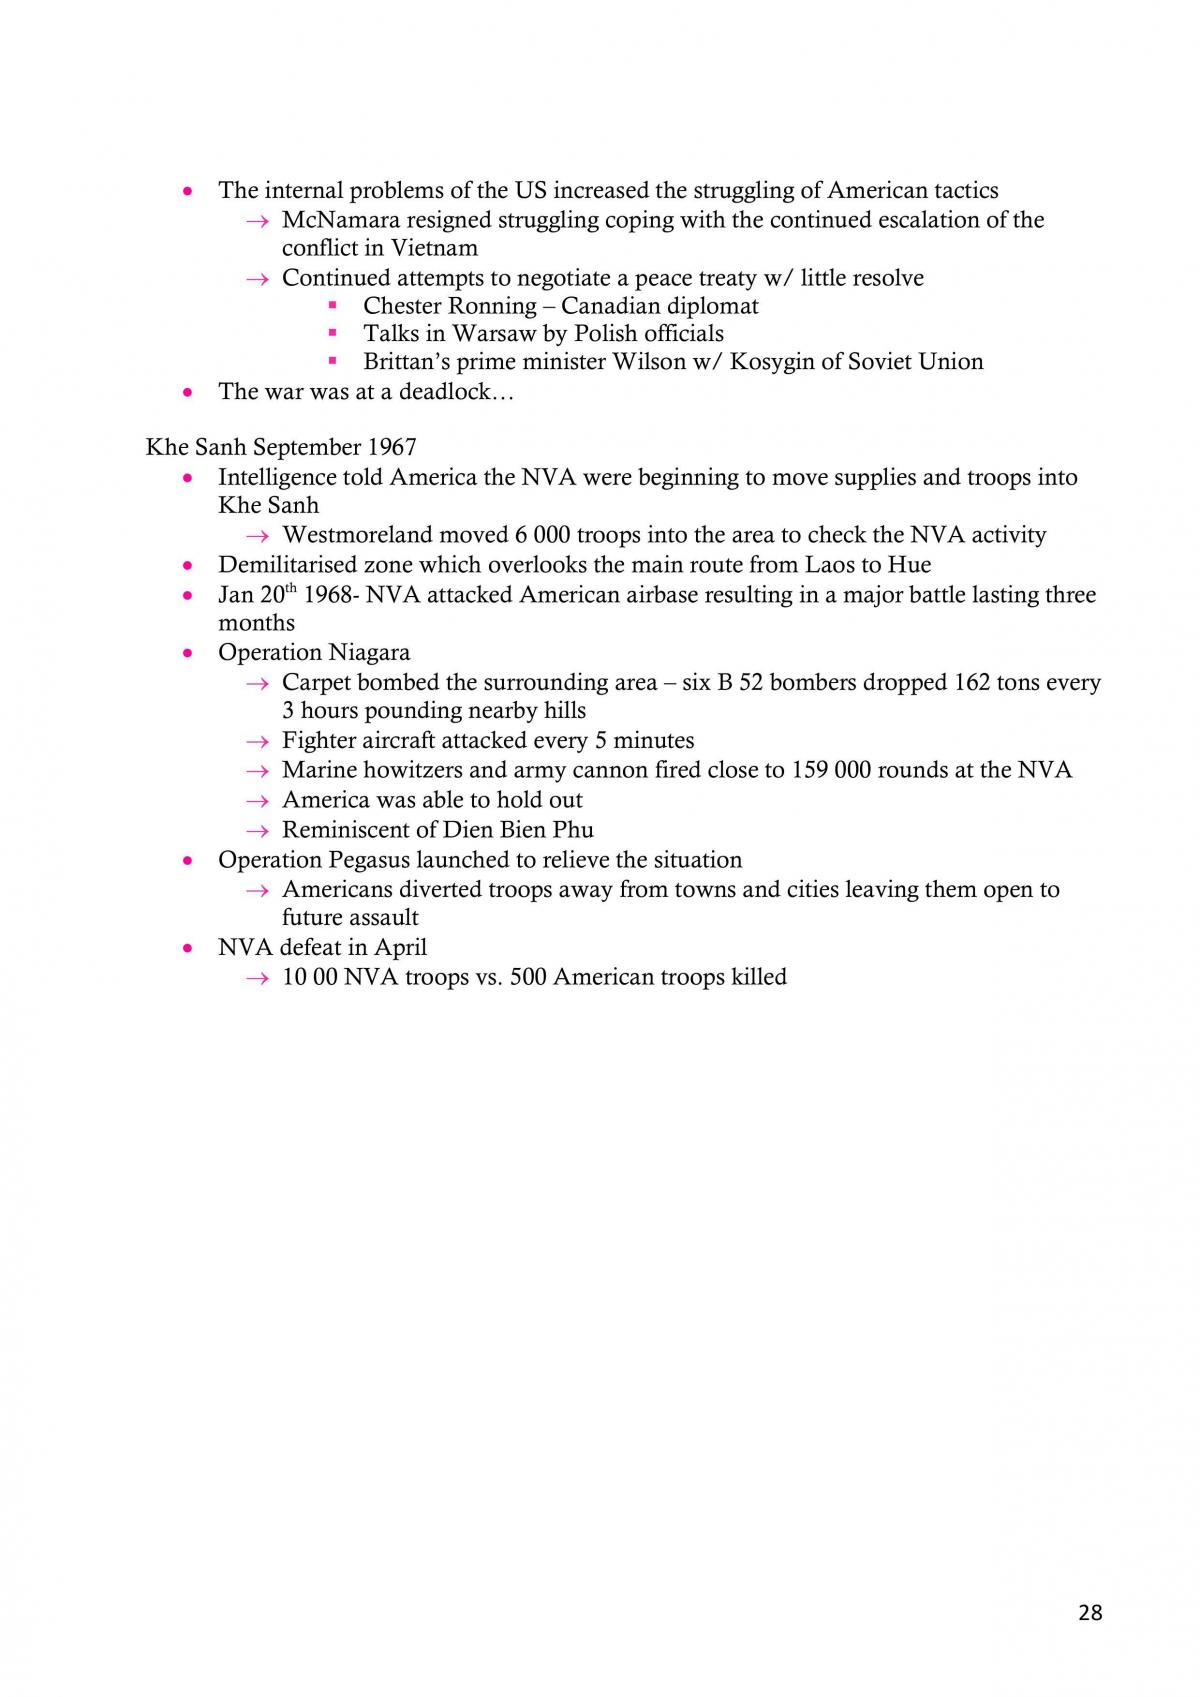 Indochina Notes - Page 28